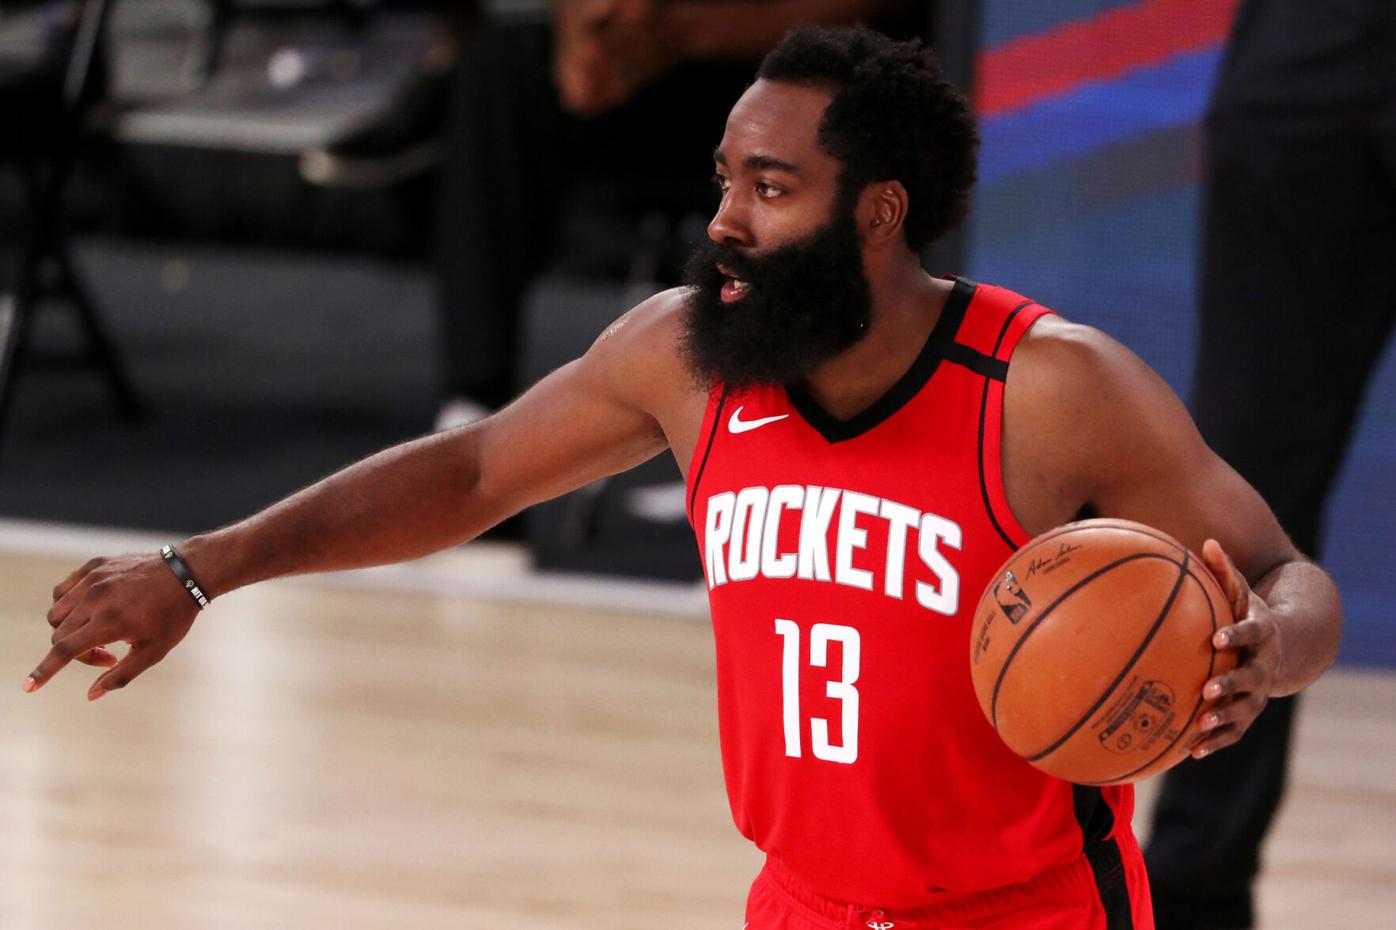 Rockets drub Magic in first game without James Harden